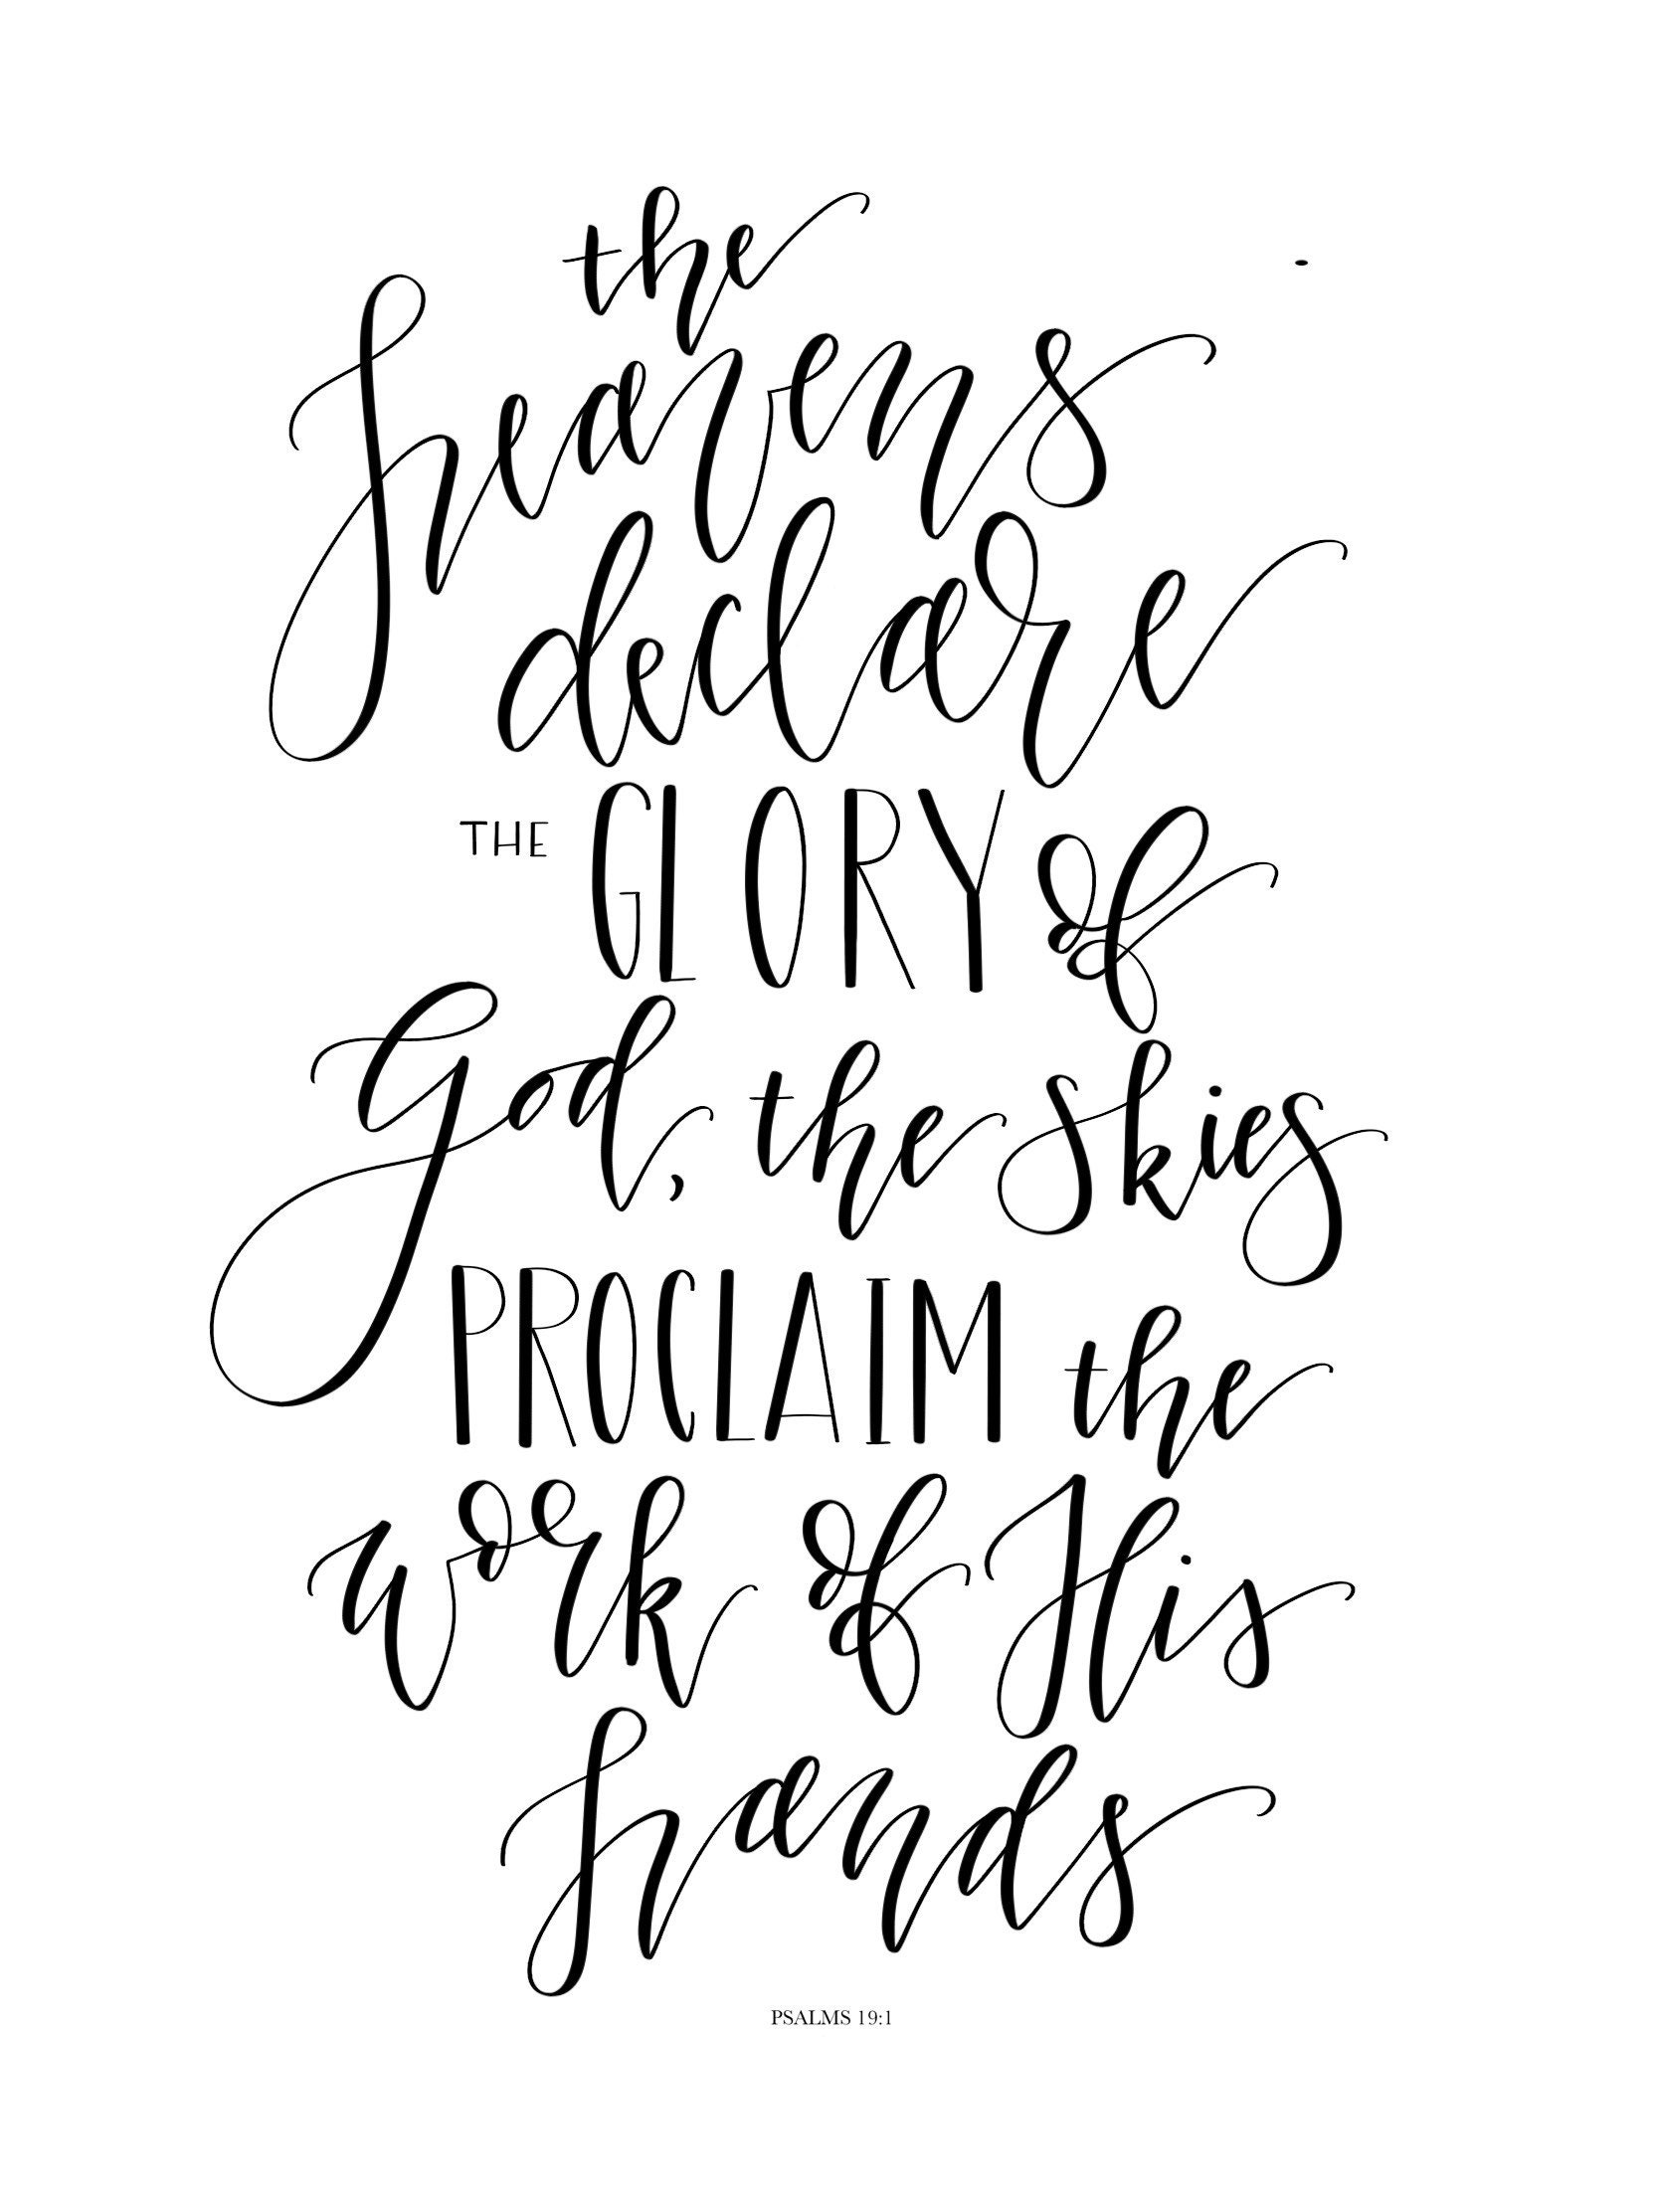 Hand Lettering Through the Psalms